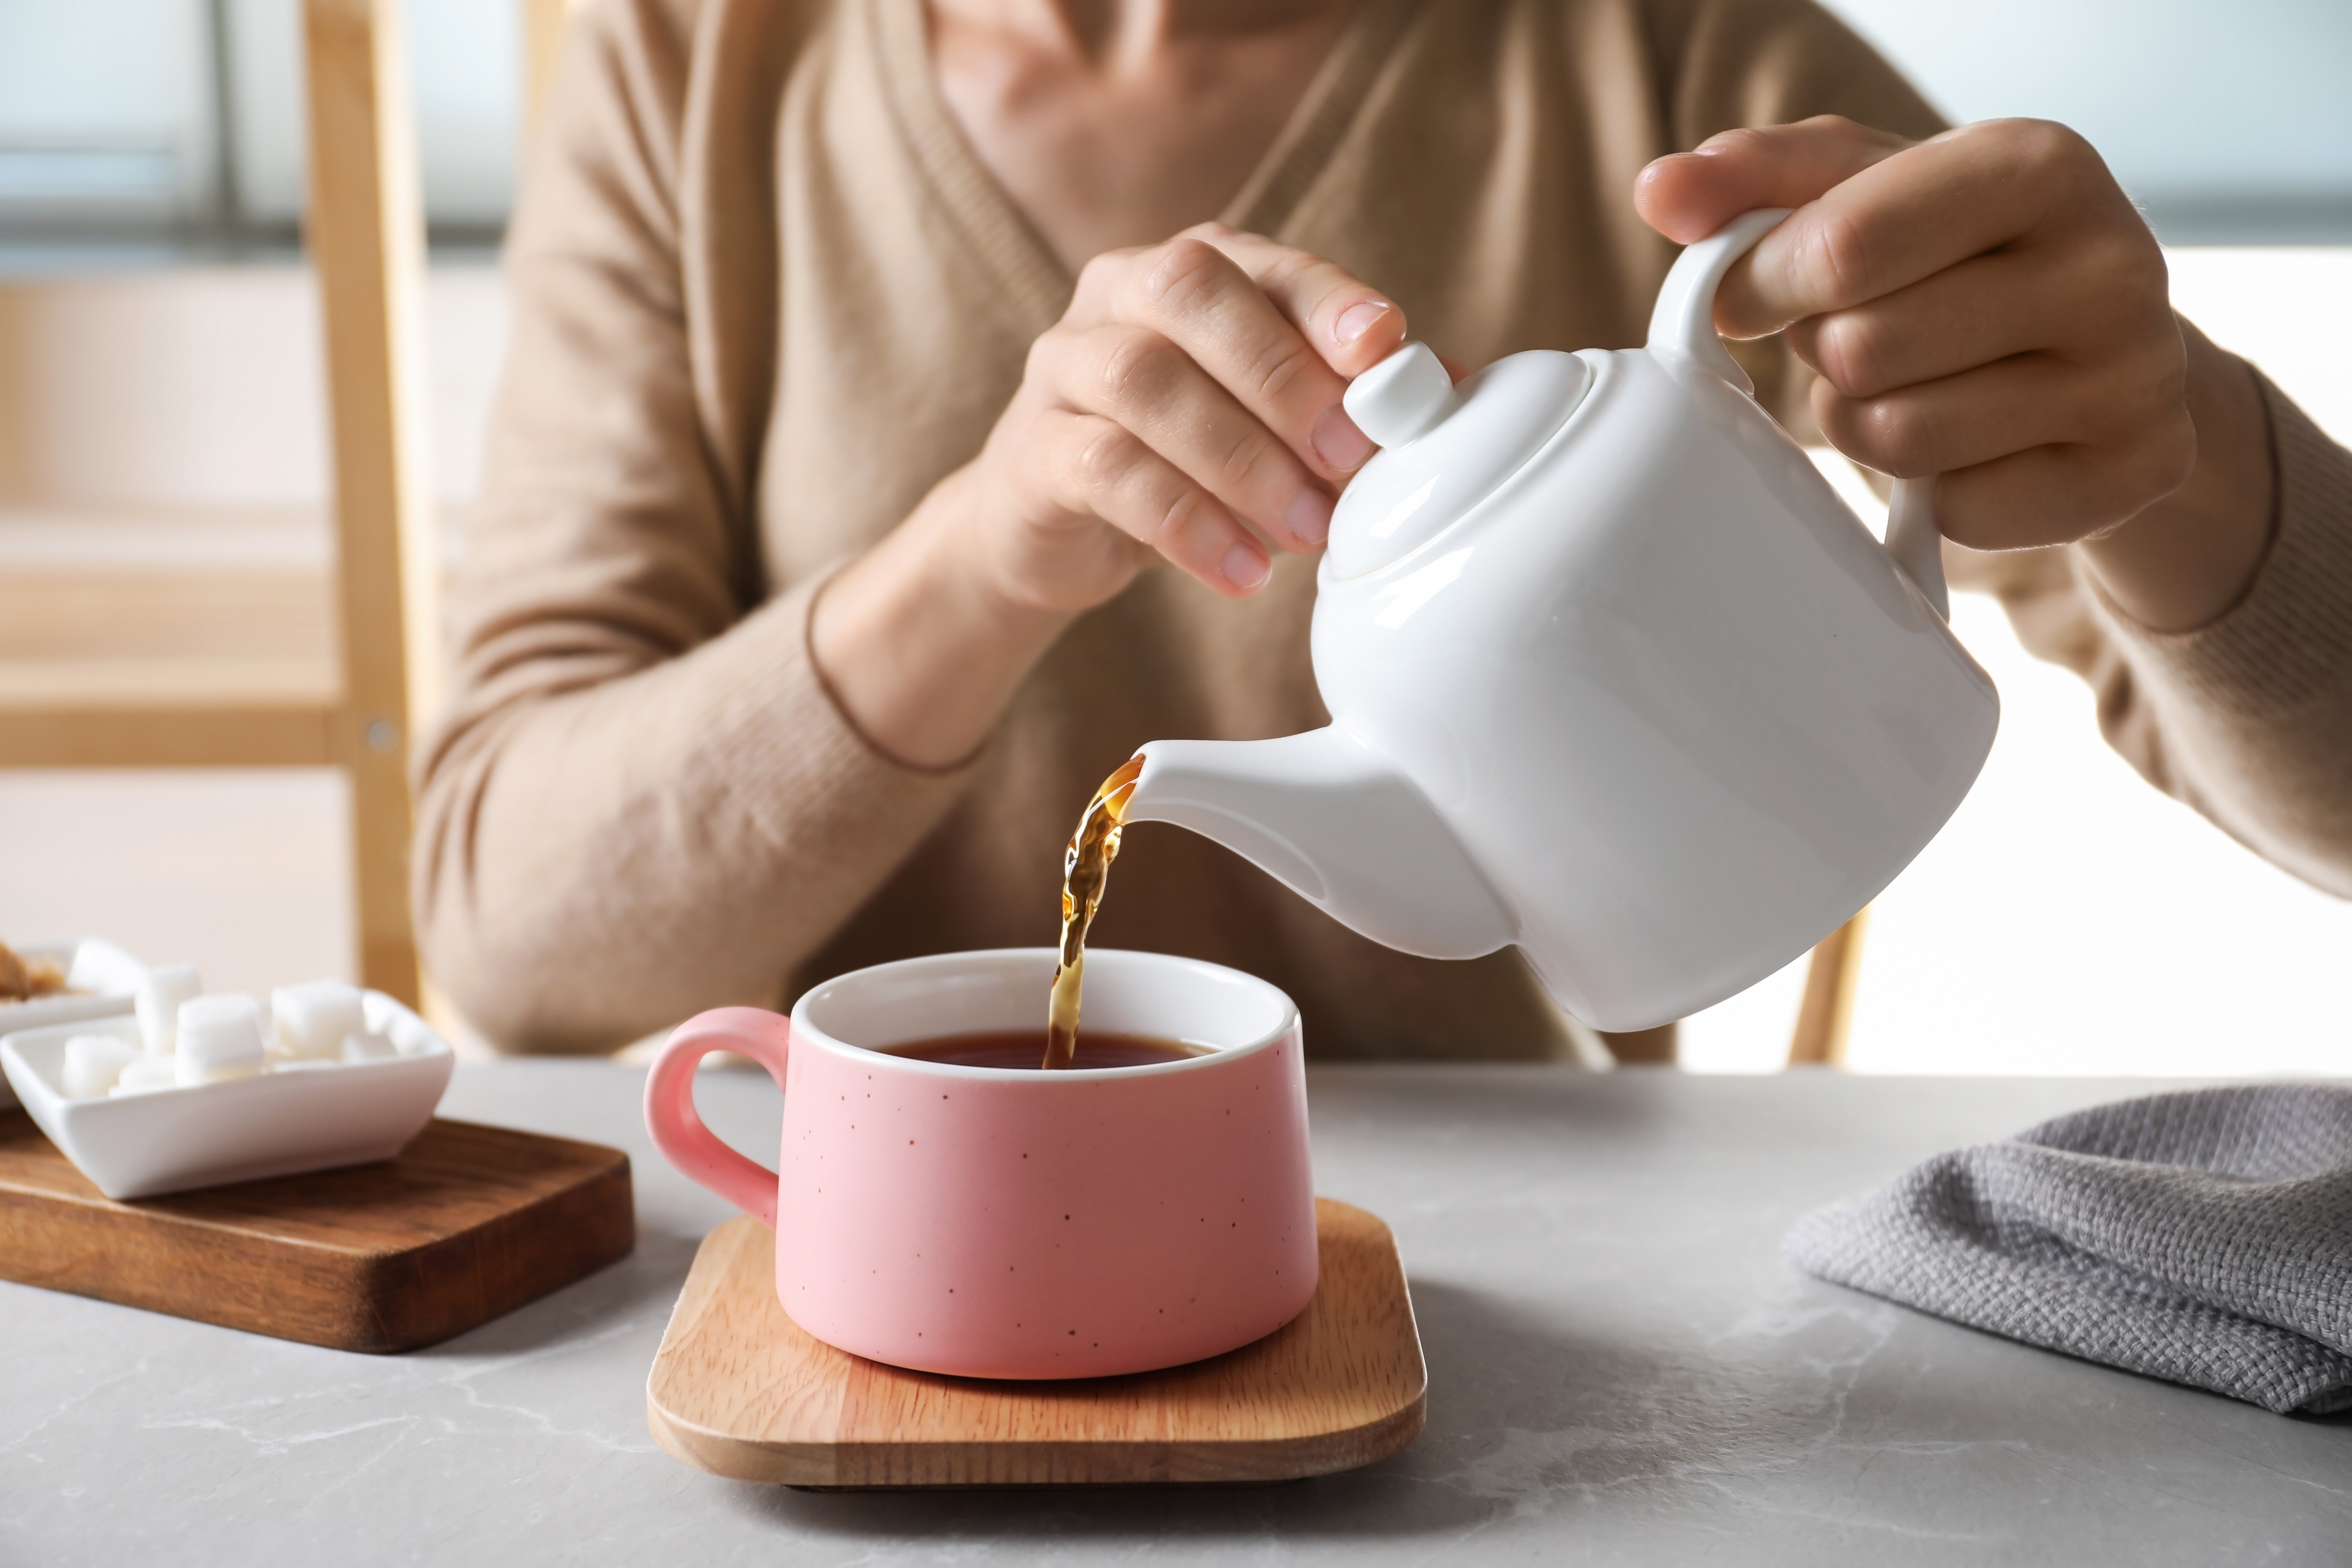 Woman pouring tea into ceramic cup | Source: Shutterstock